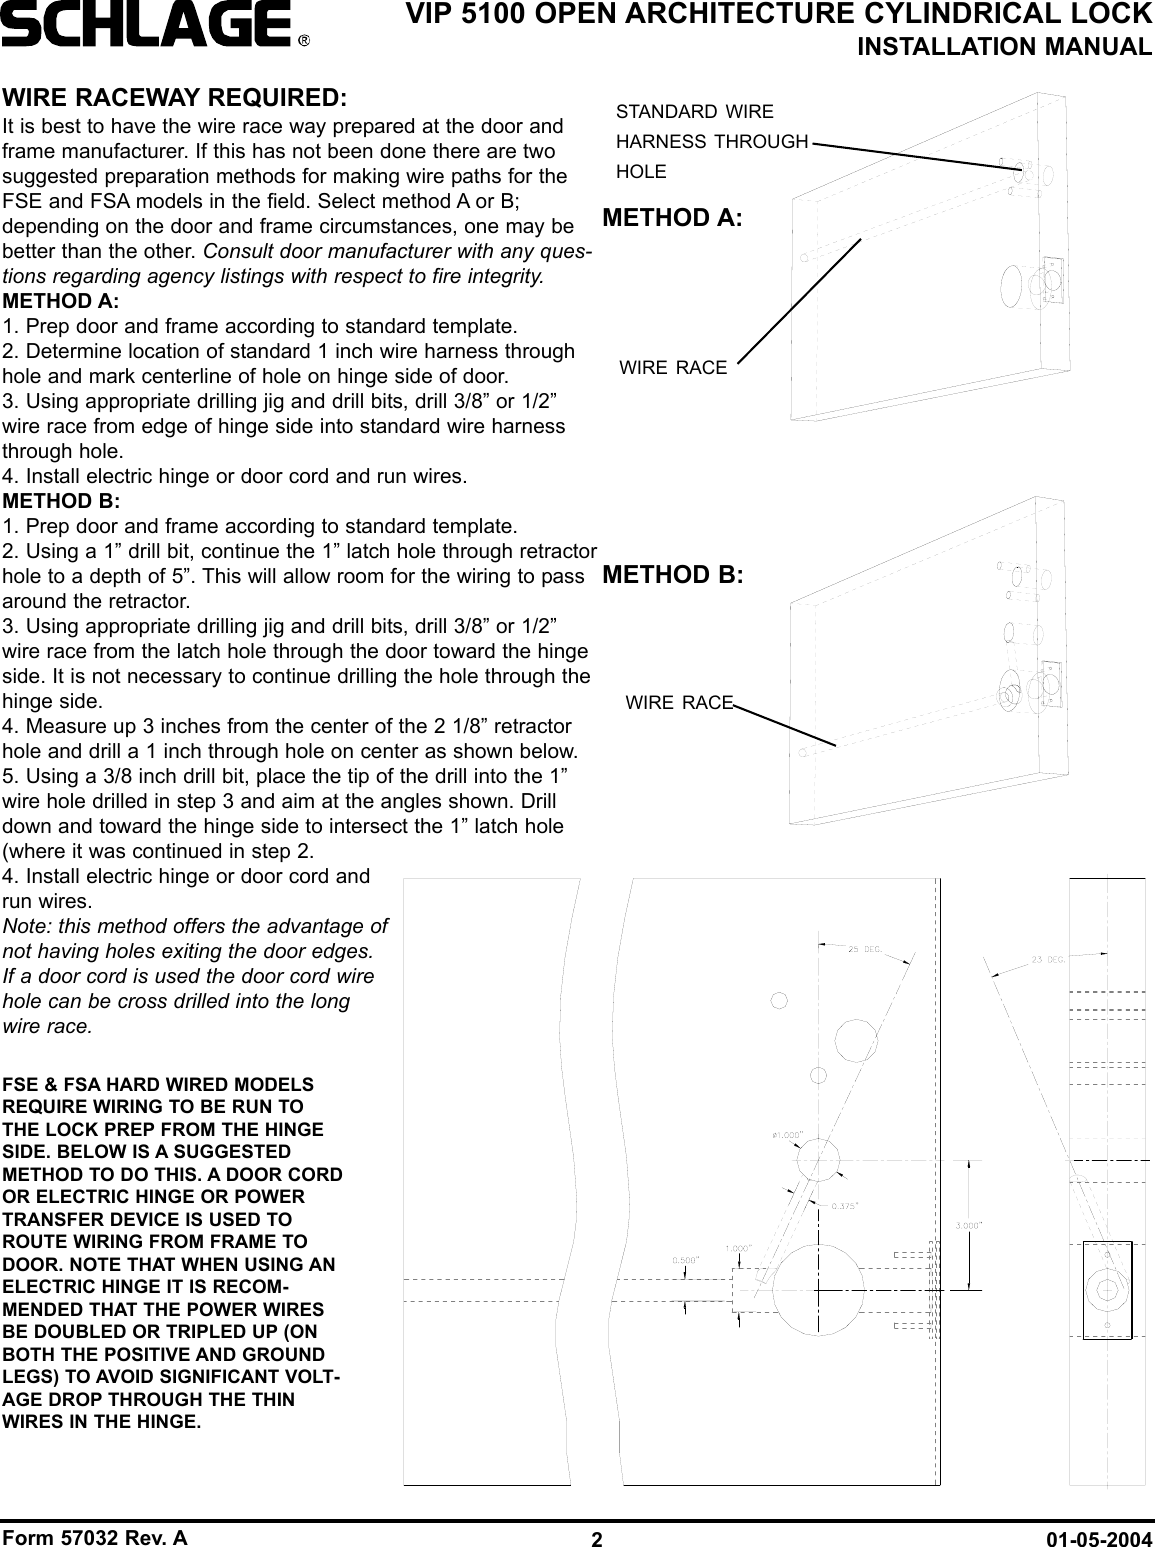 Form 57032 Rev. A 01-05-20042VIP 5100 OPEN ARCHITECTURE CYLINDRICAL LOCKINSTALLATION MANUALWIRE RACEWAY REQUIRED:It is best to have the wire race way prepared at the door andframe manufacturer. If this has not been done there are twosuggested preparation methods for making wire paths for theFSE and FSA models in the field. Select method A or B;depending on the door and frame circumstances, one may bebetter than the other. Consult door manufacturer with any ques-tions regarding agency listings with respect to fire integrity.METHOD A:1. Prep door and frame according to standard template.2. Determine location of standard 1 inch wire harness throughhole and mark centerline of hole on hinge side of door.3. Using appropriate drilling jig and drill bits, drill 3/8” or 1/2”wire race from edge of hinge side into standard wire harnessthrough hole.4. Install electric hinge or door cord and run wires.METHOD B:1. Prep door and frame according to standard template.2. Using a 1” drill bit, continue the 1” latch hole through retractorhole to a depth of 5”. This will allow room for the wiring to passaround the retractor.3. Using appropriate drilling jig and drill bits, drill 3/8” or 1/2”wire race from the latch hole through the door toward the hingeside. It is not necessary to continue drilling the hole through thehinge side.4. Measure up 3 inches from the center of the 2 1/8” retractorhole and drill a 1 inch through hole on center as shown below.5. Using a 3/8 inch drill bit, place the tip of the drill into the 1”wire hole drilled in step 3 and aim at the angles shown. Drilldown and toward the hinge side to intersect the 1” latch hole(where it was continued in step 2.4. Install electric hinge or door cord andrun wires.Note: this method offers the advantage ofnot having holes exiting the door edges.If a door cord is used the door cord wirehole can be cross drilled into the longwire race.WIRE RACEWIRE RACESTANDARD WIREHARNESS THROUGHHOLEMETHOD B:METHOD A:FSE &amp; FSA HARD WIRED MODELSREQUIRE WIRING TO BE RUN TOTHE LOCK PREP FROM THE HINGESIDE. BELOW IS A SUGGESTEDMETHOD TO DO THIS. A DOOR CORDOR ELECTRIC HINGE OR POWERTRANSFER DEVICE IS USED TOROUTE WIRING FROM FRAME TODOOR. NOTE THAT WHEN USING ANELECTRIC HINGE IT IS RECOM-MENDED THAT THE POWER WIRESBE DOUBLED OR TRIPLED UP (ONBOTH THE POSITIVE AND GROUNDLEGS) TO AVOID SIGNIFICANT VOLT-AGE DROP THROUGH THE THINWIRES IN THE HINGE.